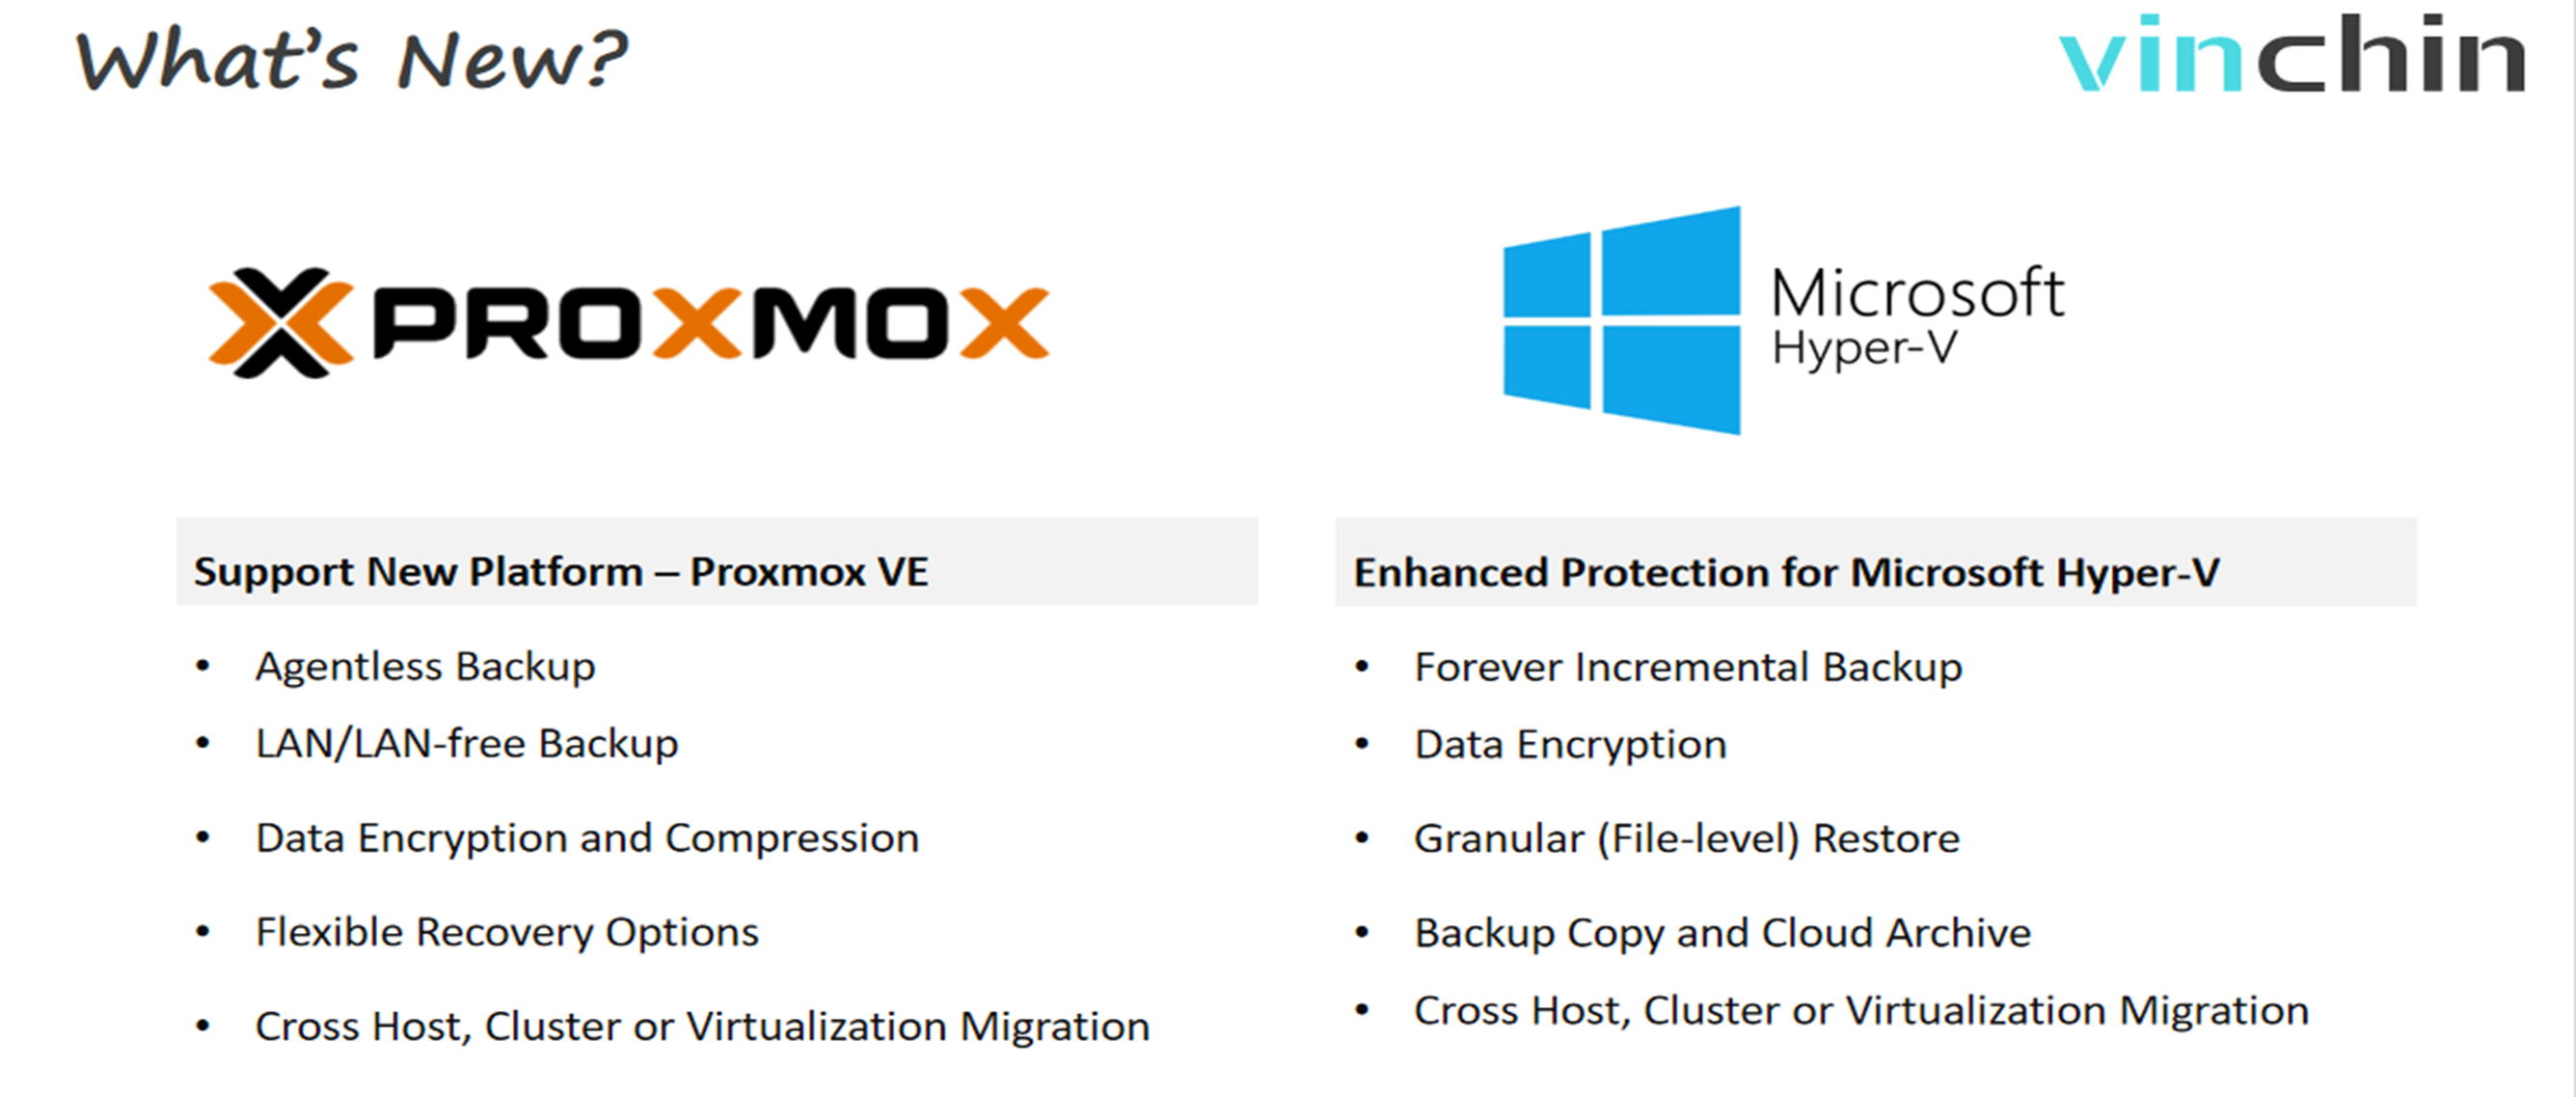 Expanded support for Proxmox VE